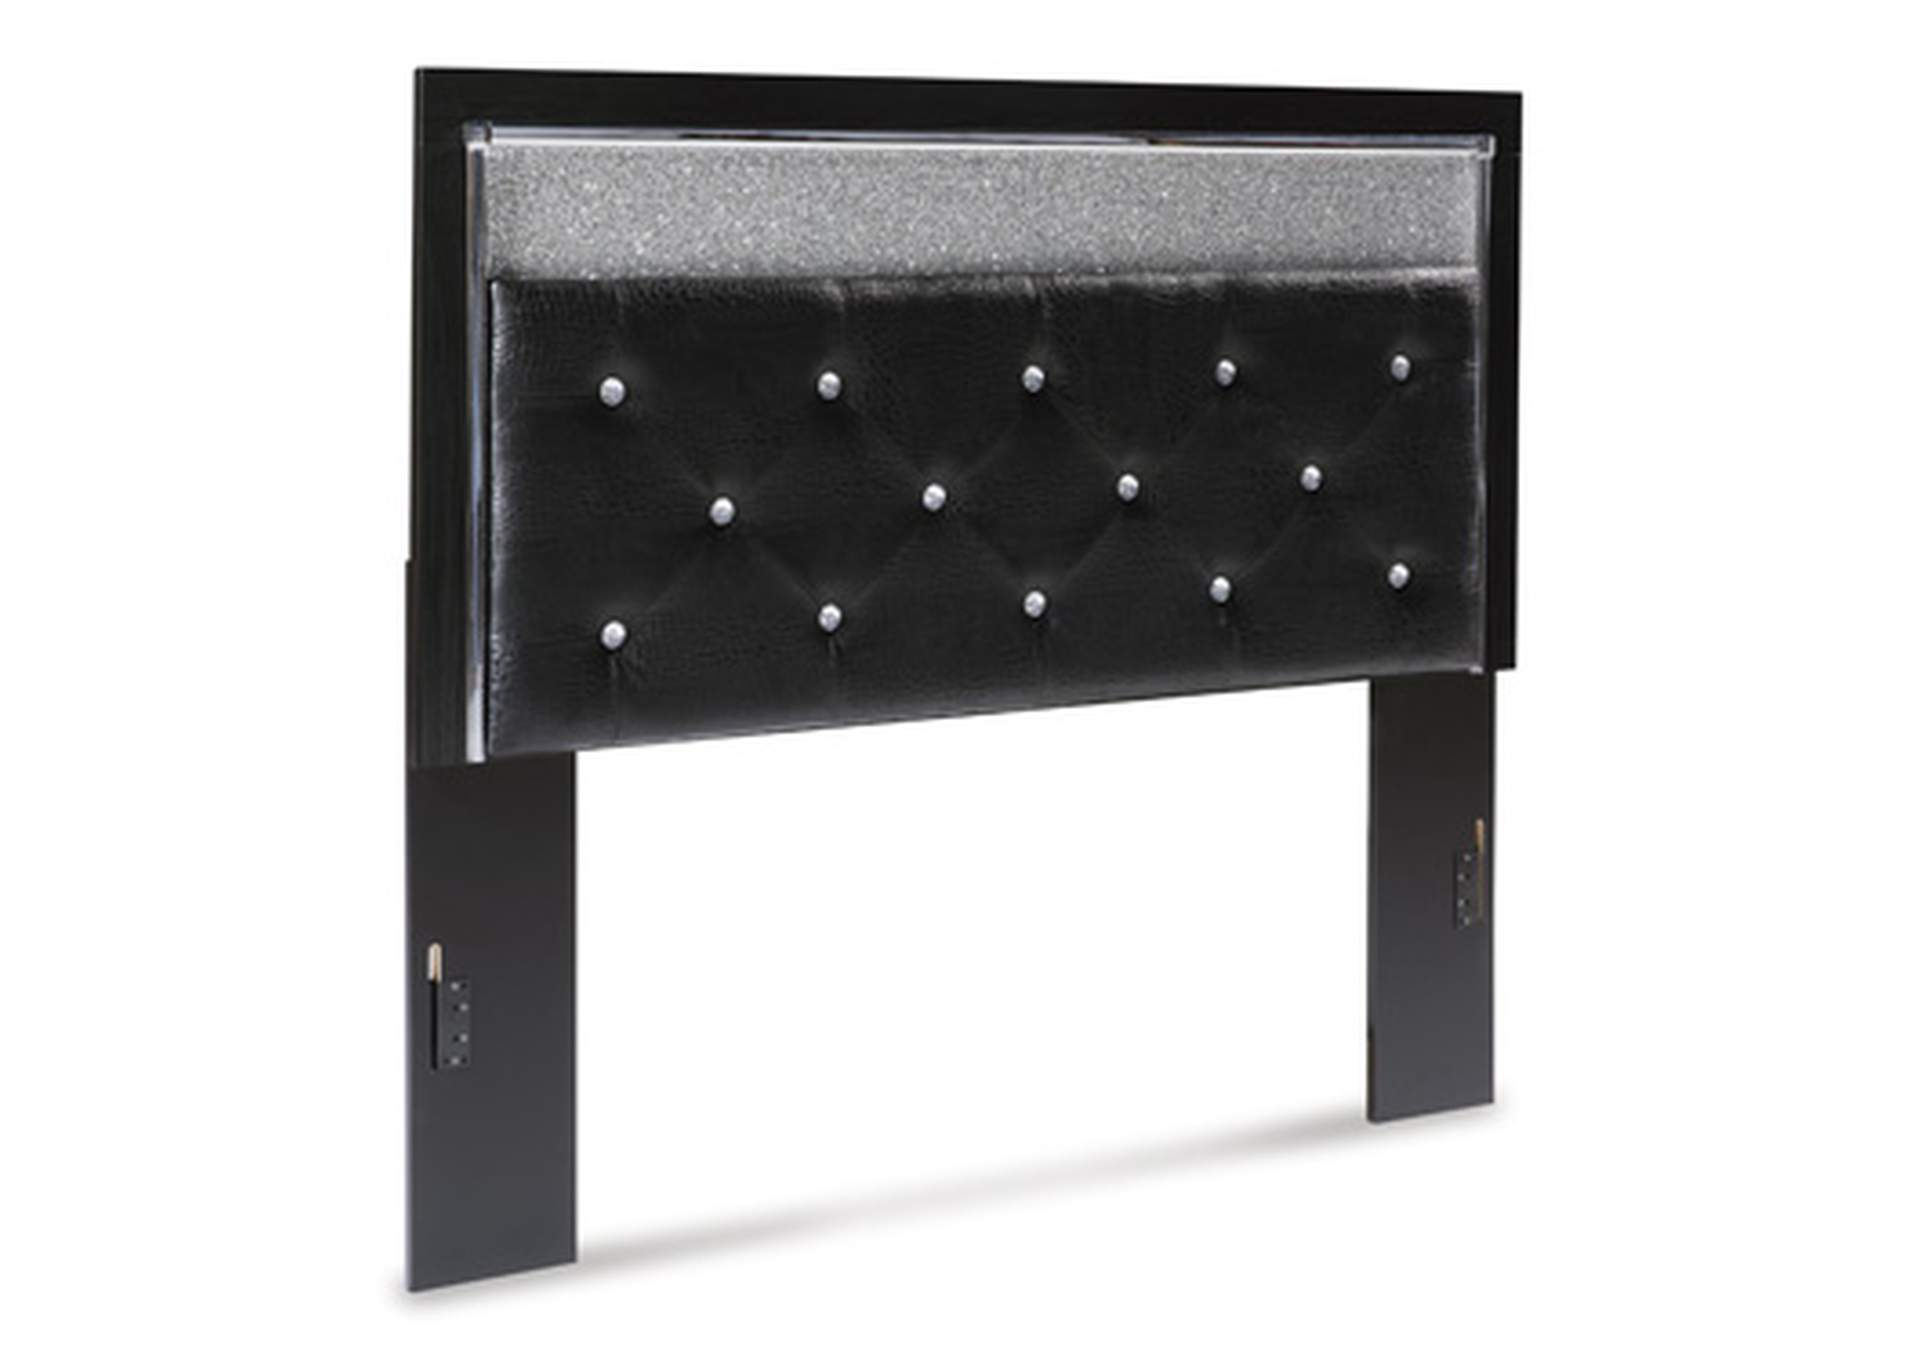 Kaydell Queen Upholstered Panel Headboard,Signature Design By Ashley